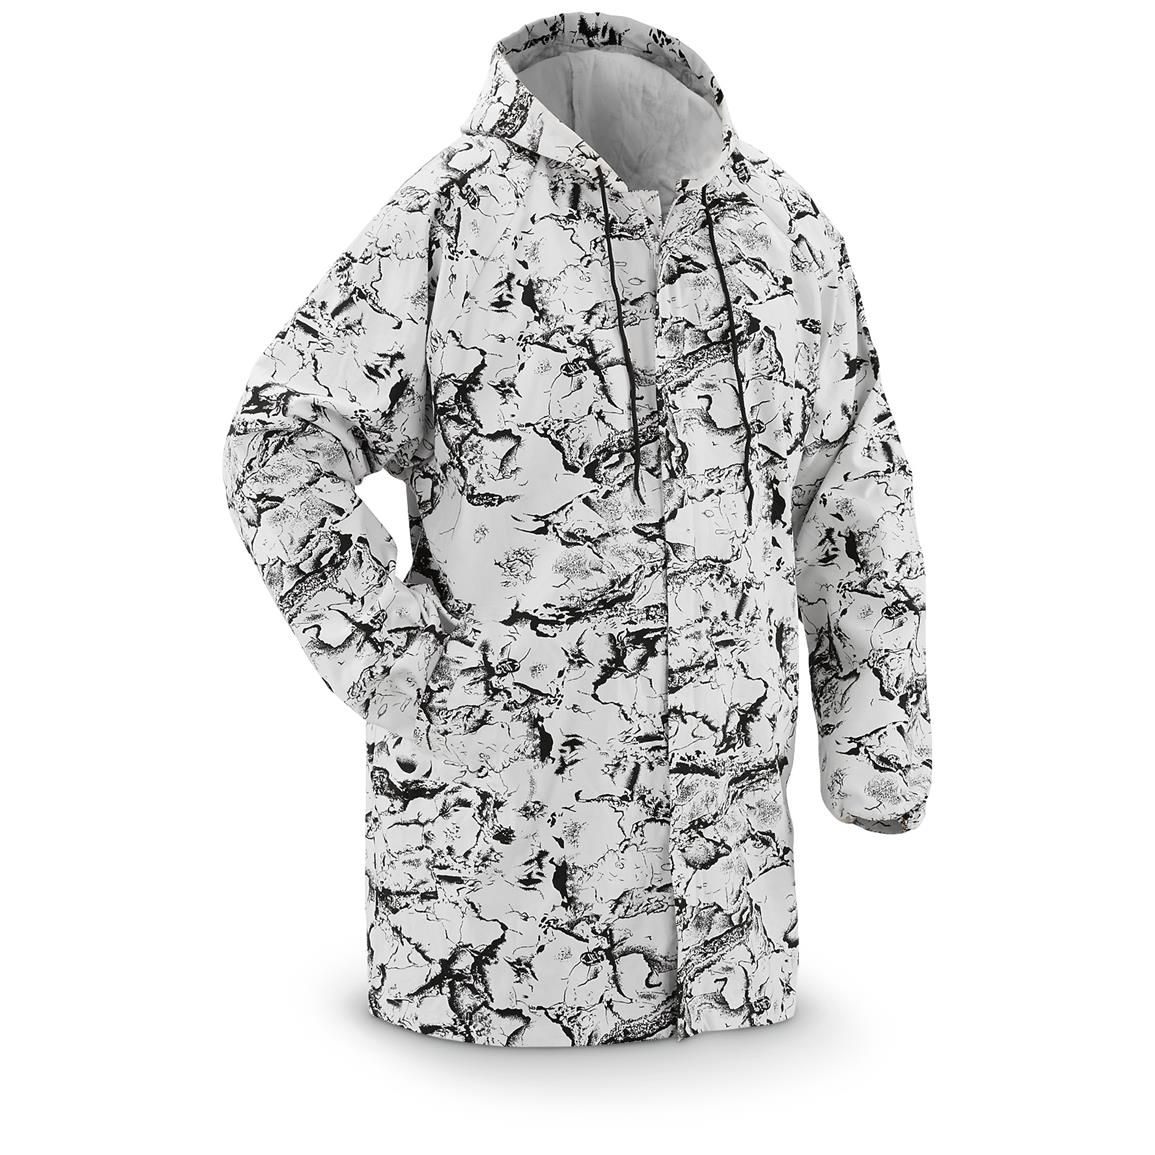 Natural Gear Hunting Jacket, Game Hunter, Snow Camo 651685, Camo Jackets at Sportsman's Guide